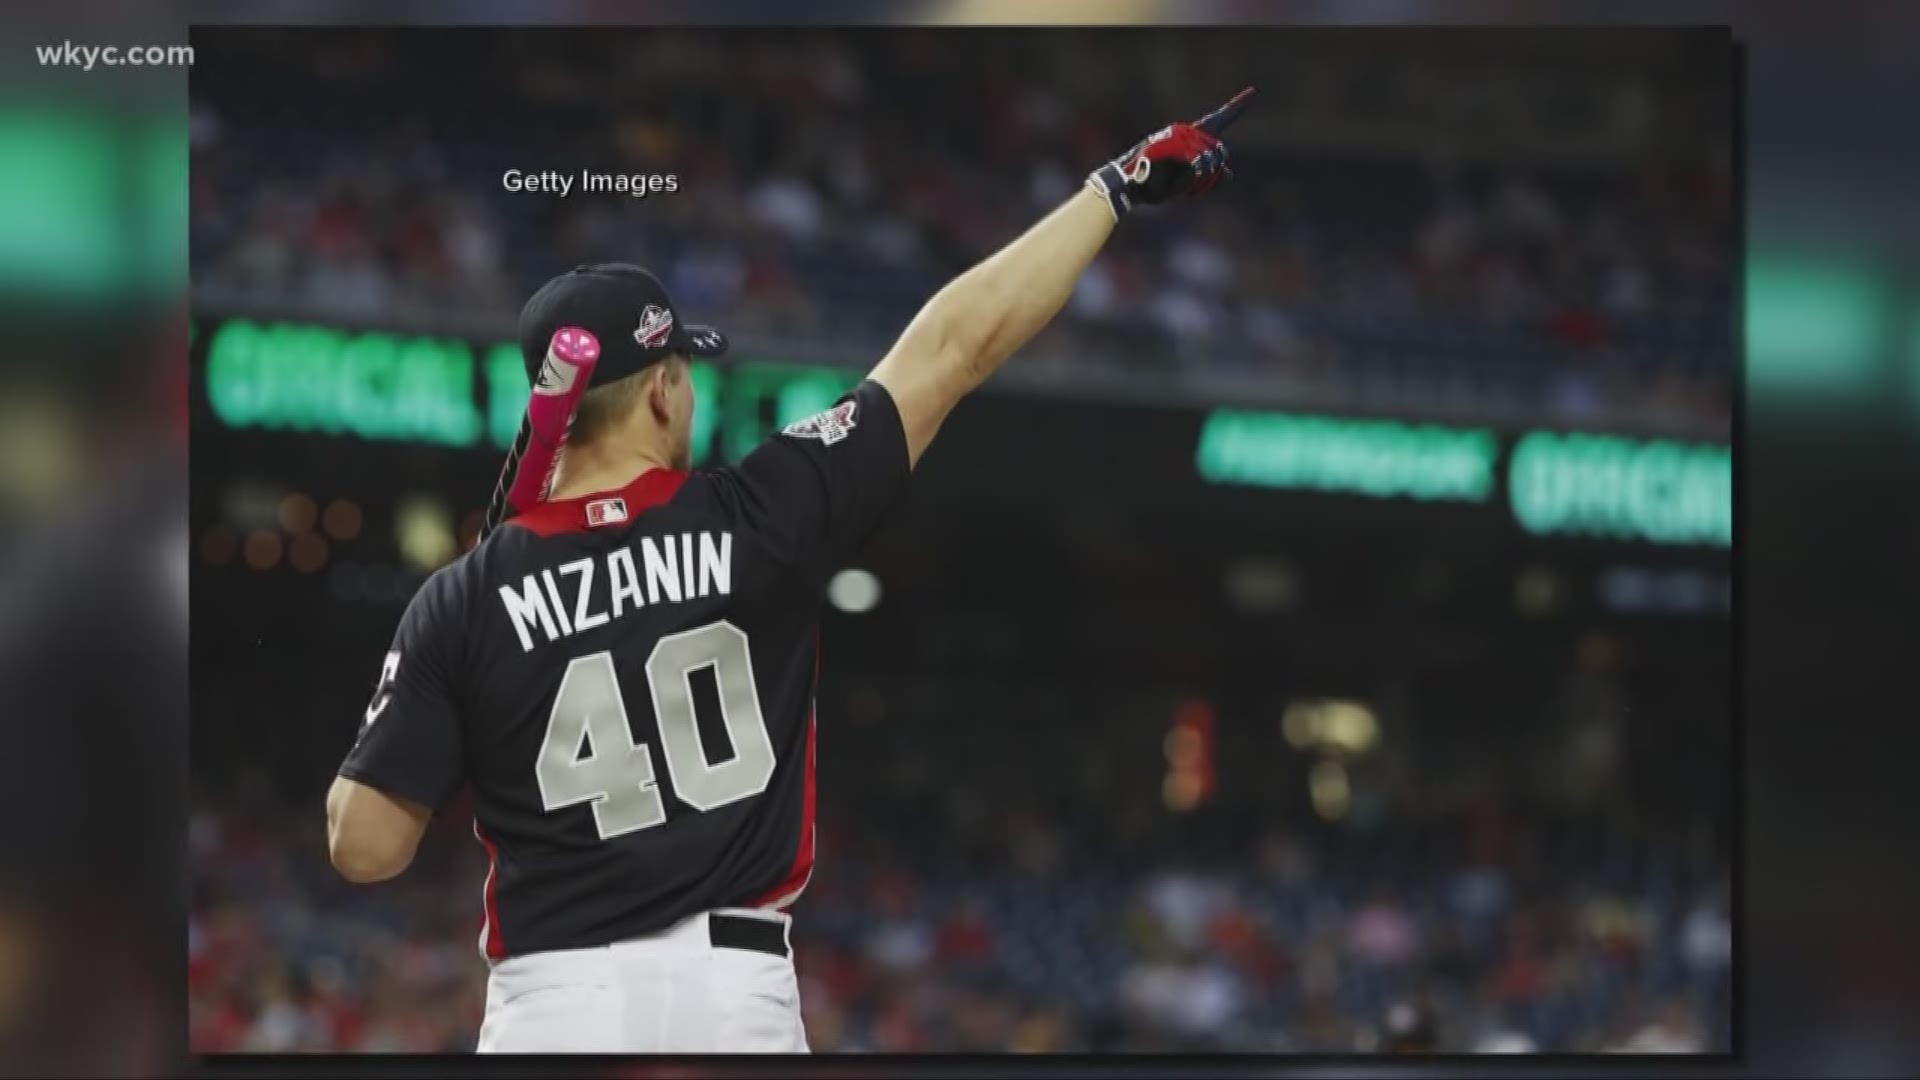 WWE superstar The Miz to represent Cleveland Indians in MLB